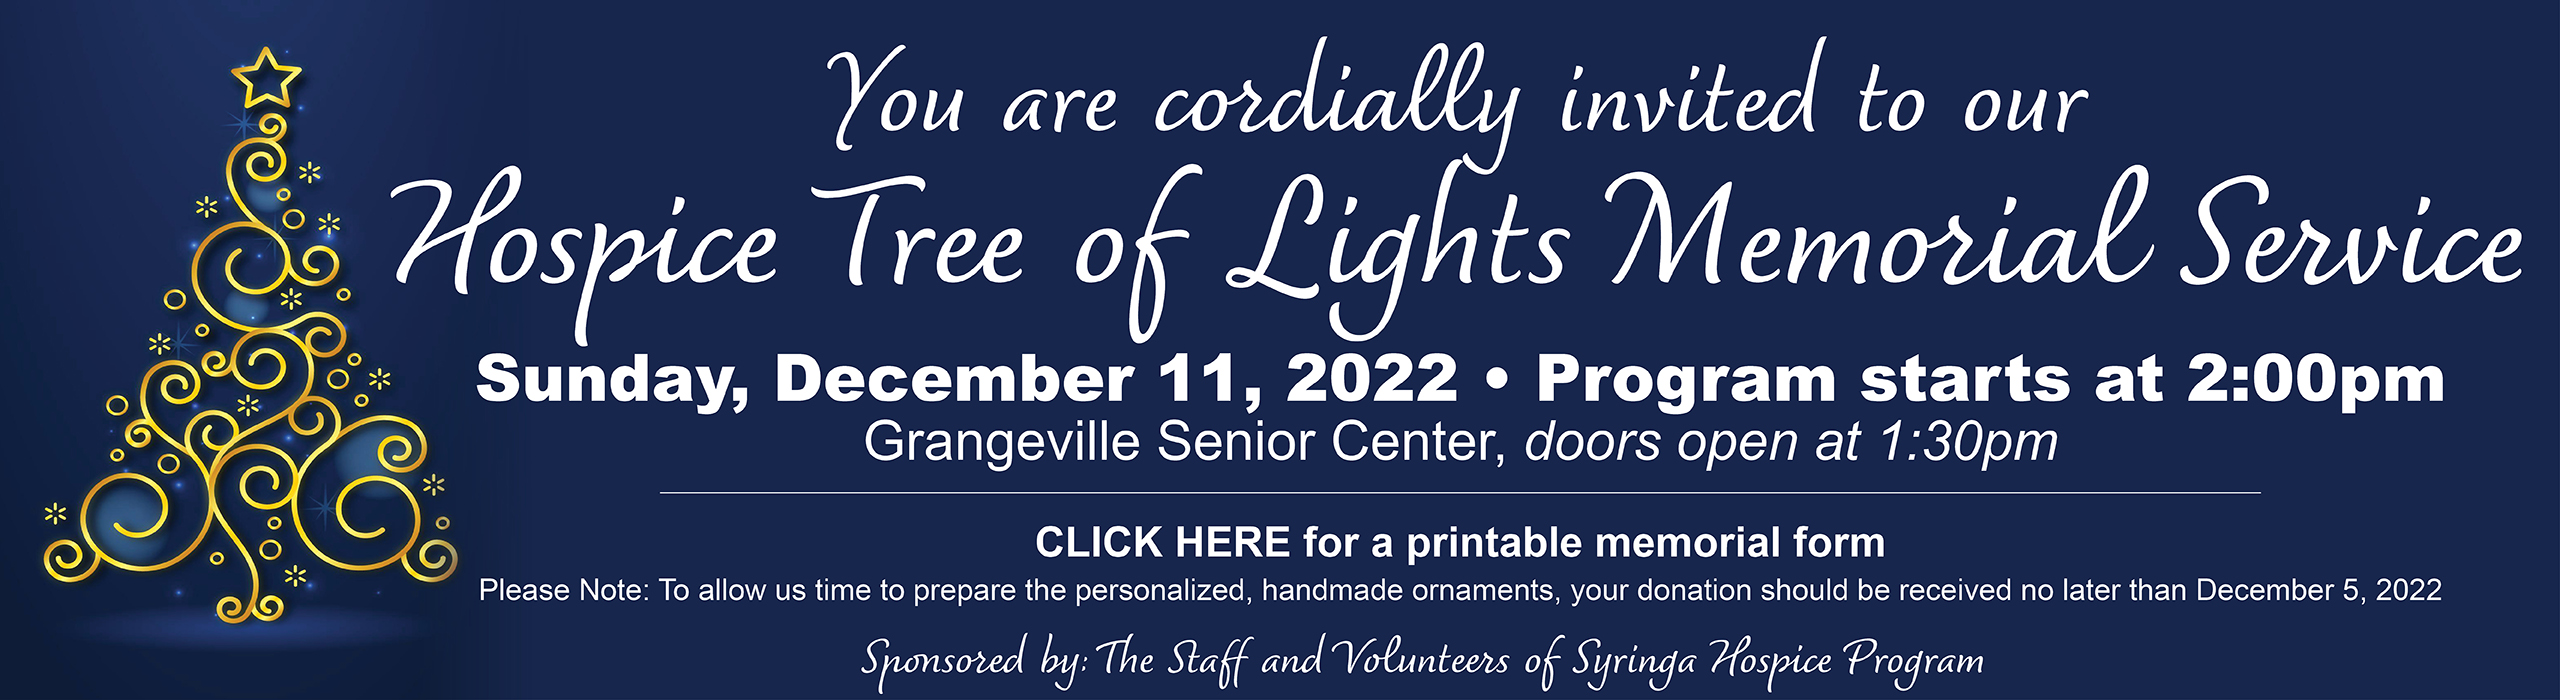 You are cordially invited to our Hospice Tree of Lights Memorial Service

Sunday, December 11, 2022
Program starts at 2:30pm
Grangeville Senior Center, doors open at 1:30pm

CLICK HERE for a printable memorial form
Please Note: To allow us time to prepare the personalized, handmade ornaments, your donation should be received no later than December 5, 2022

Sponsored by:
The Staff and Volunteers of Syringa Hospice Program